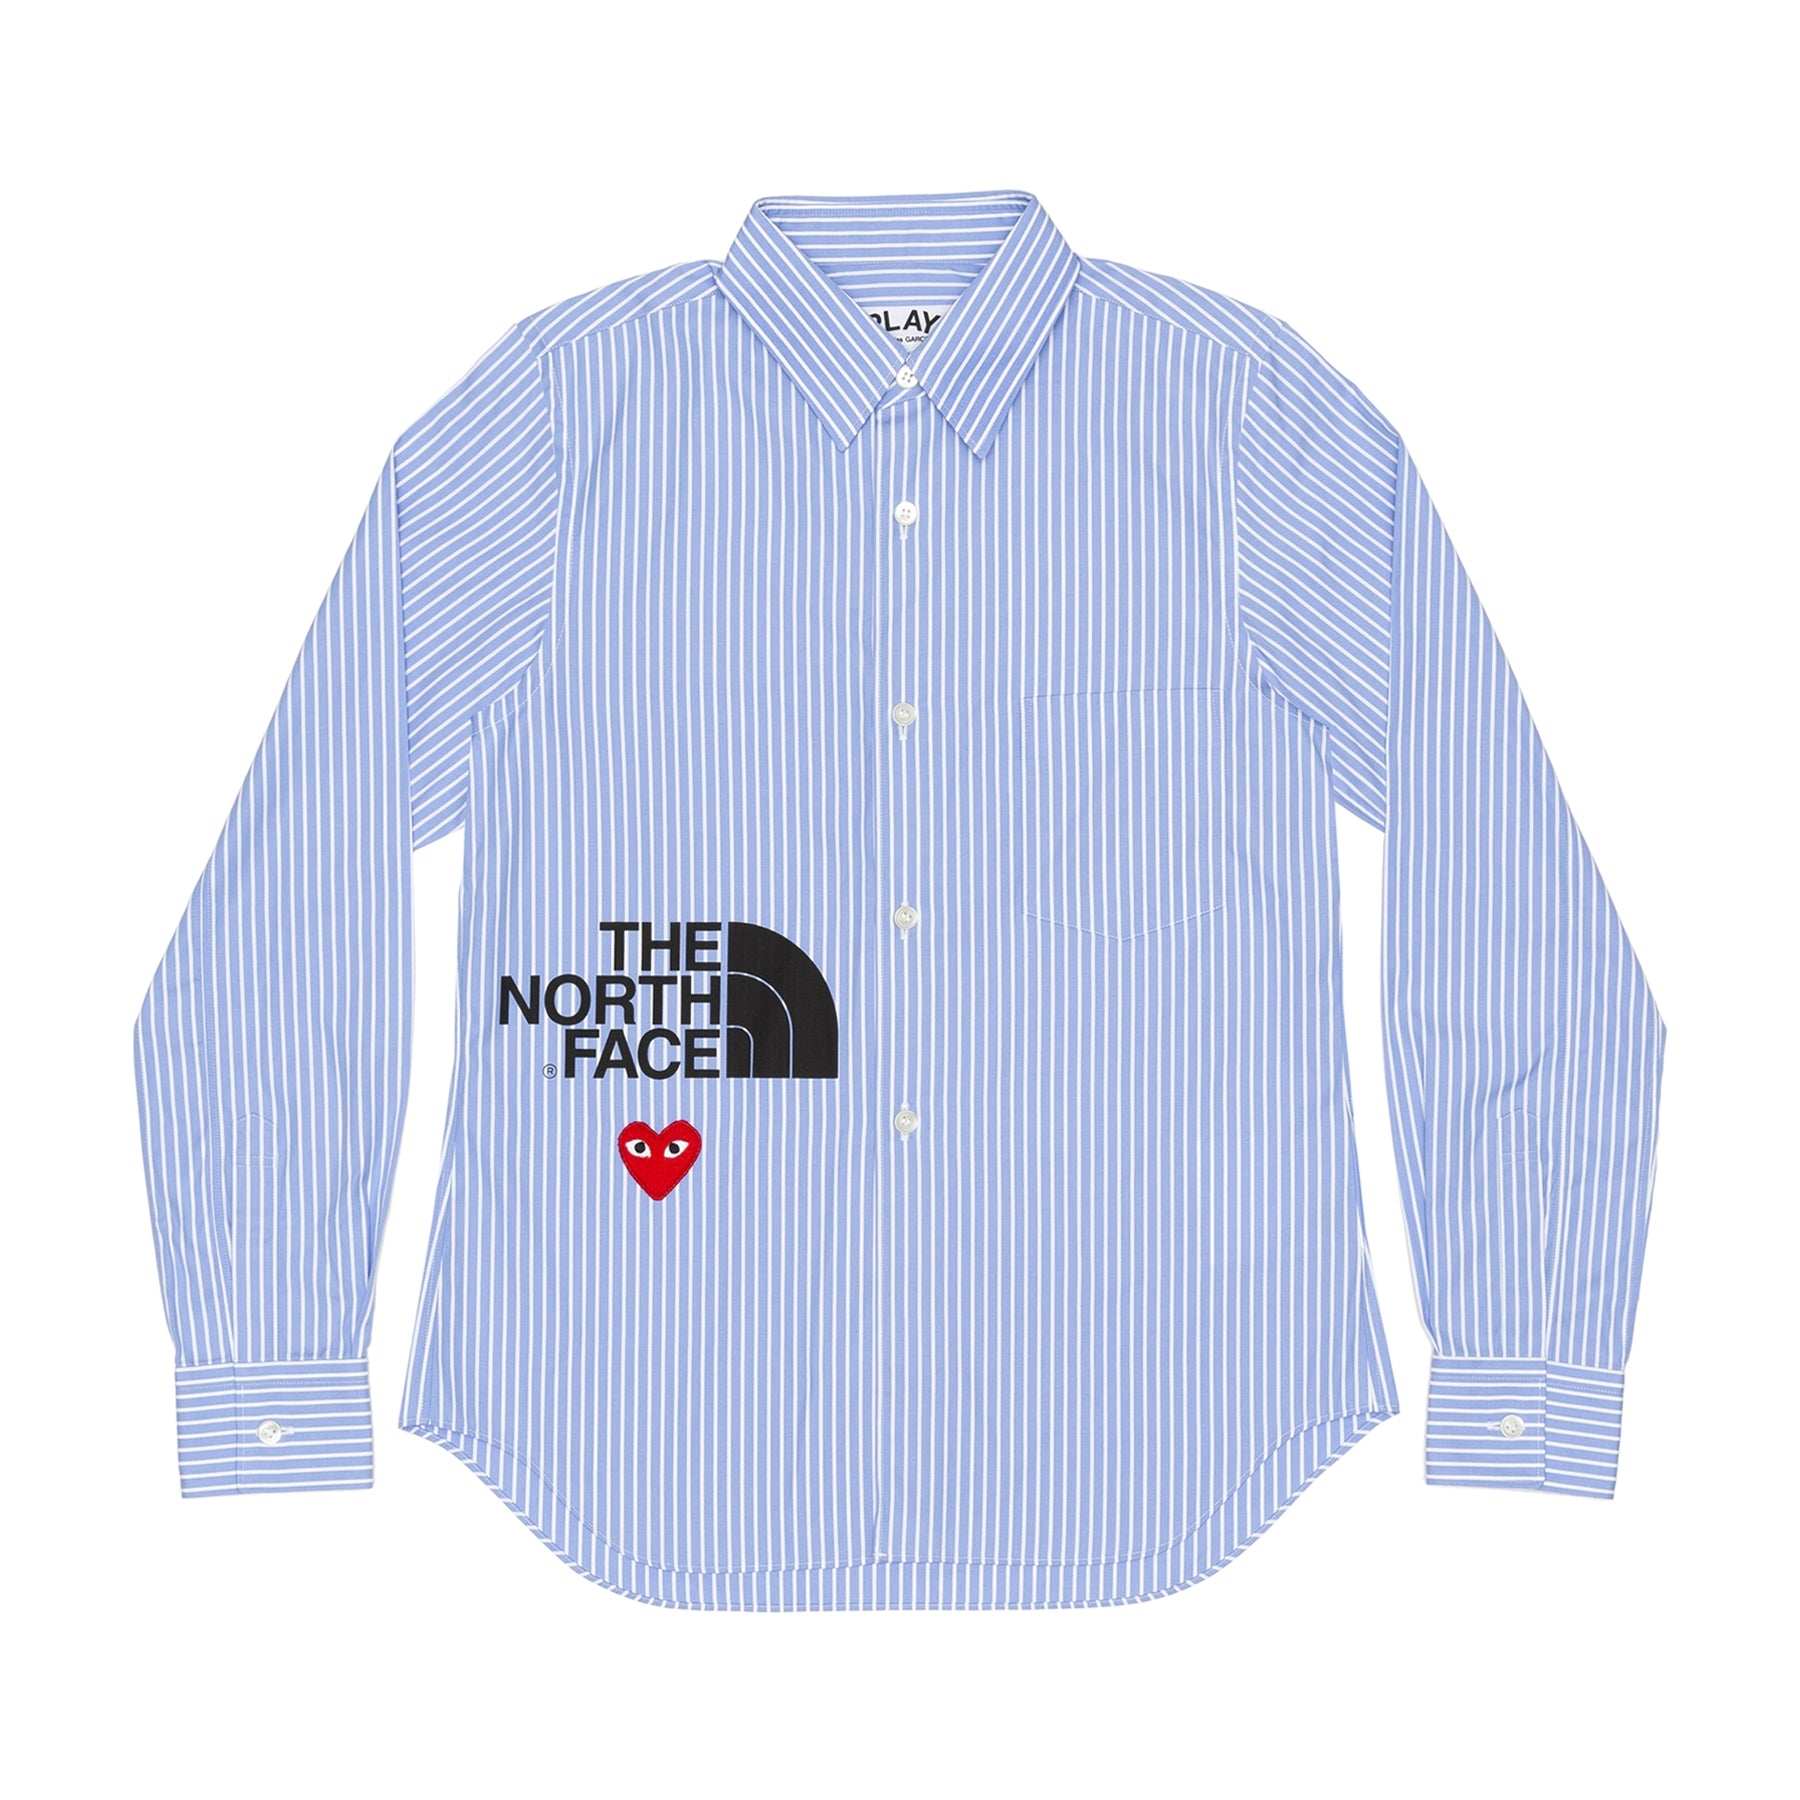 CDG PLAY - The North Face X Play Blouse - (Stripe) view 1